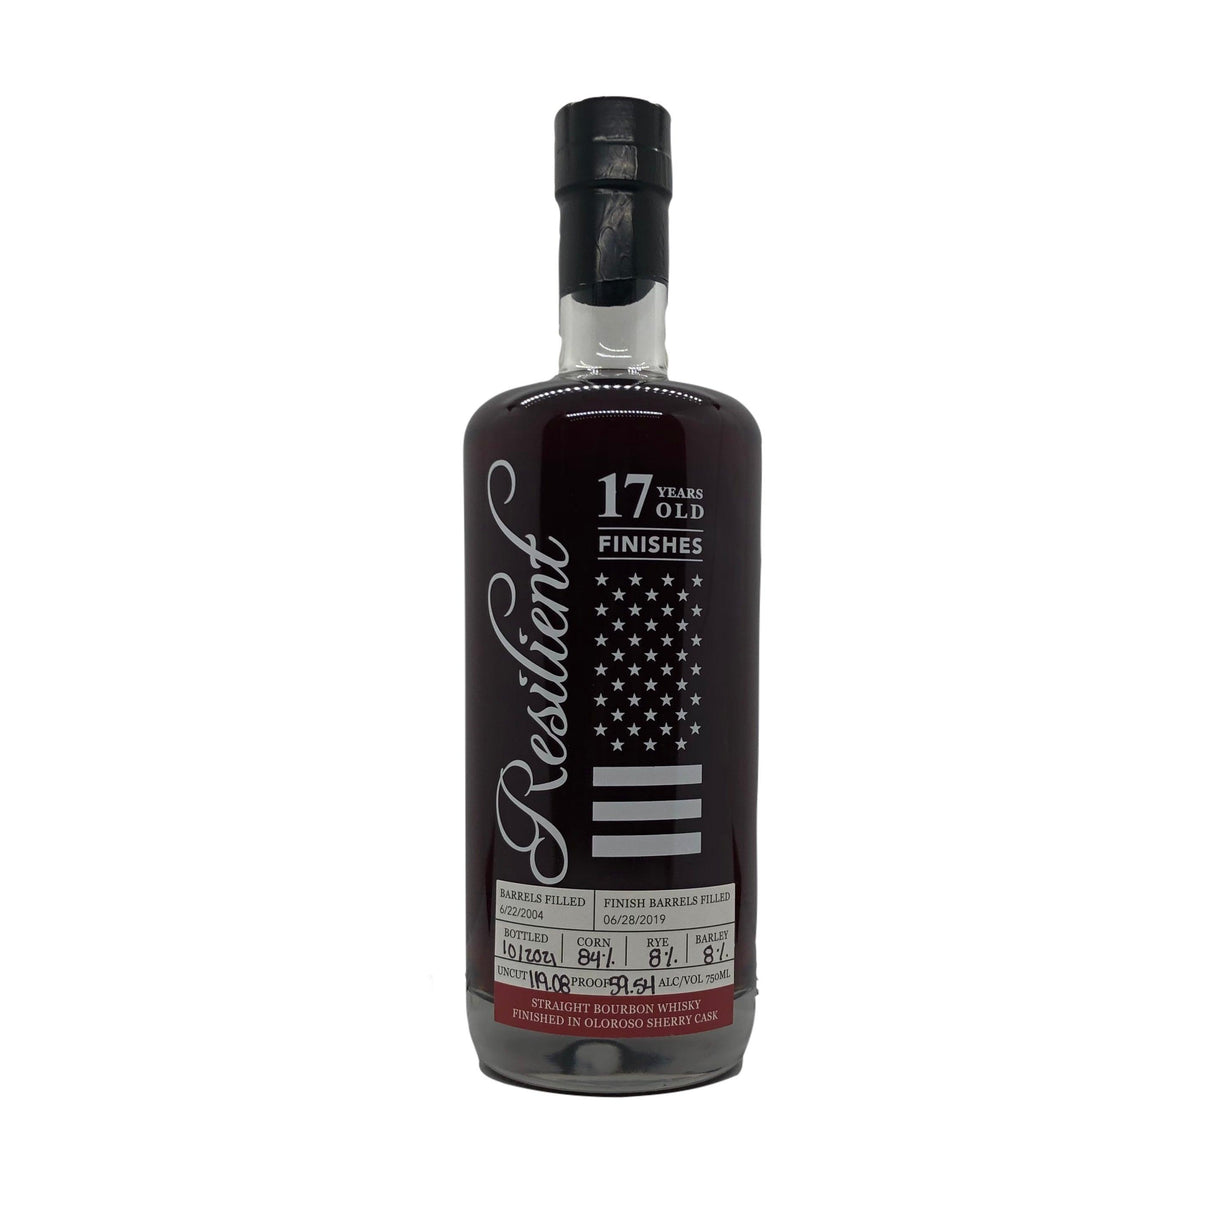 Resilient 17 Years Straight Bourbon Whiskey Finishes in Oloroso Sherry Cask - De Wine Spot | DWS - Drams/Whiskey, Wines, Sake